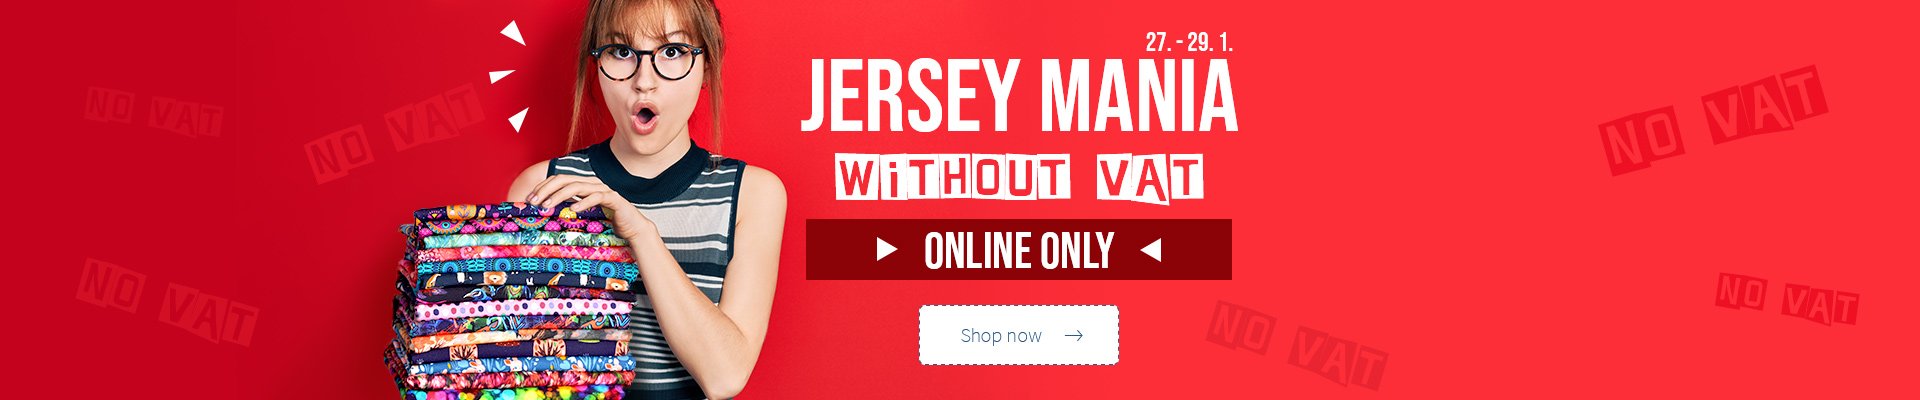 Jersey mania without VAT